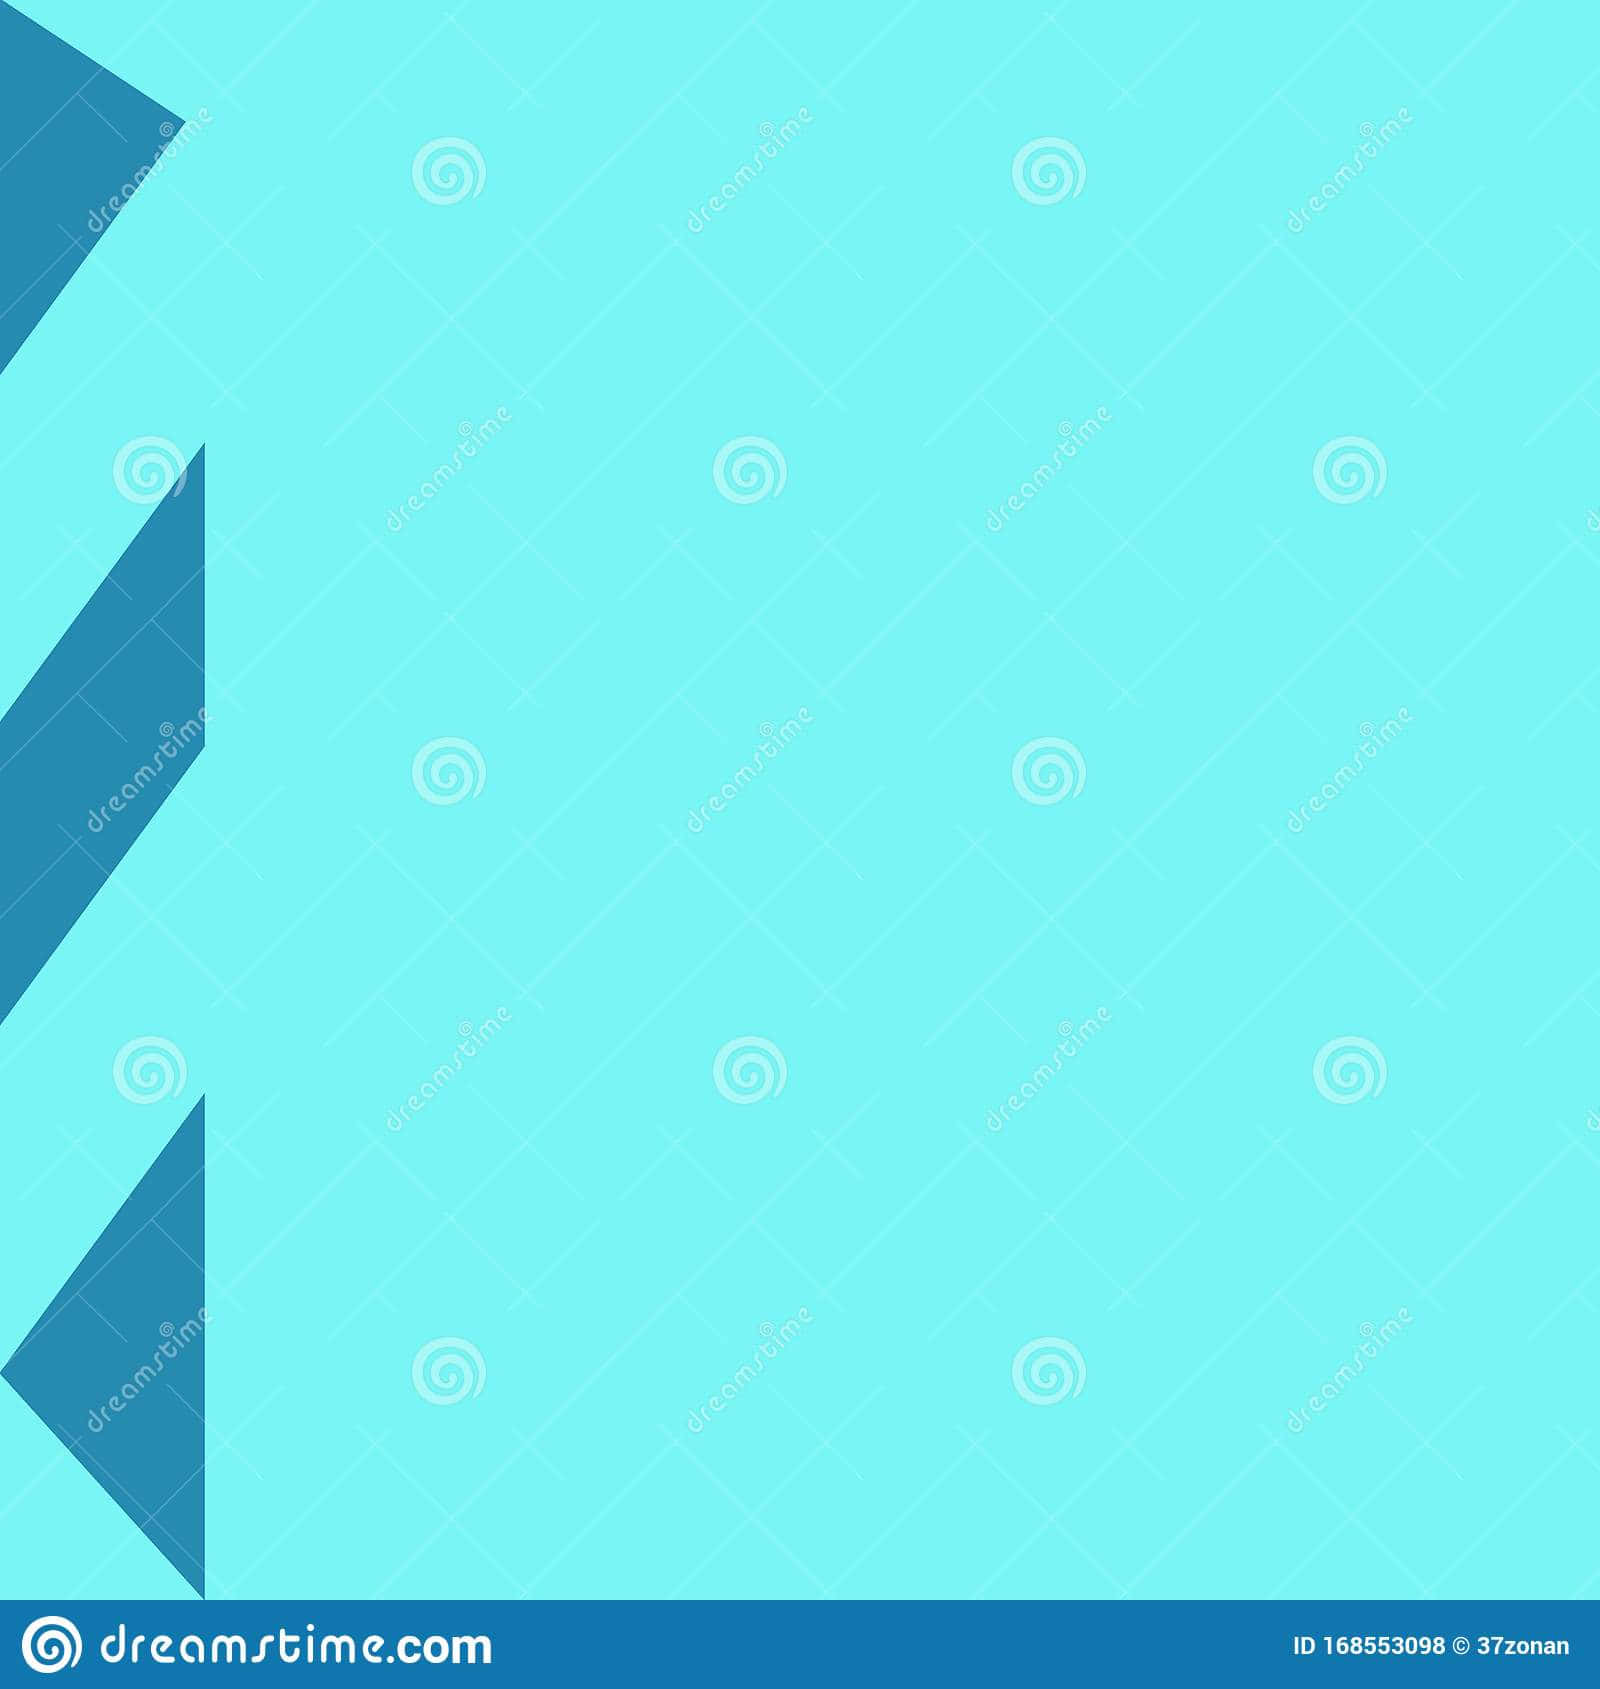 Blue Background With Arrows Wallpaper